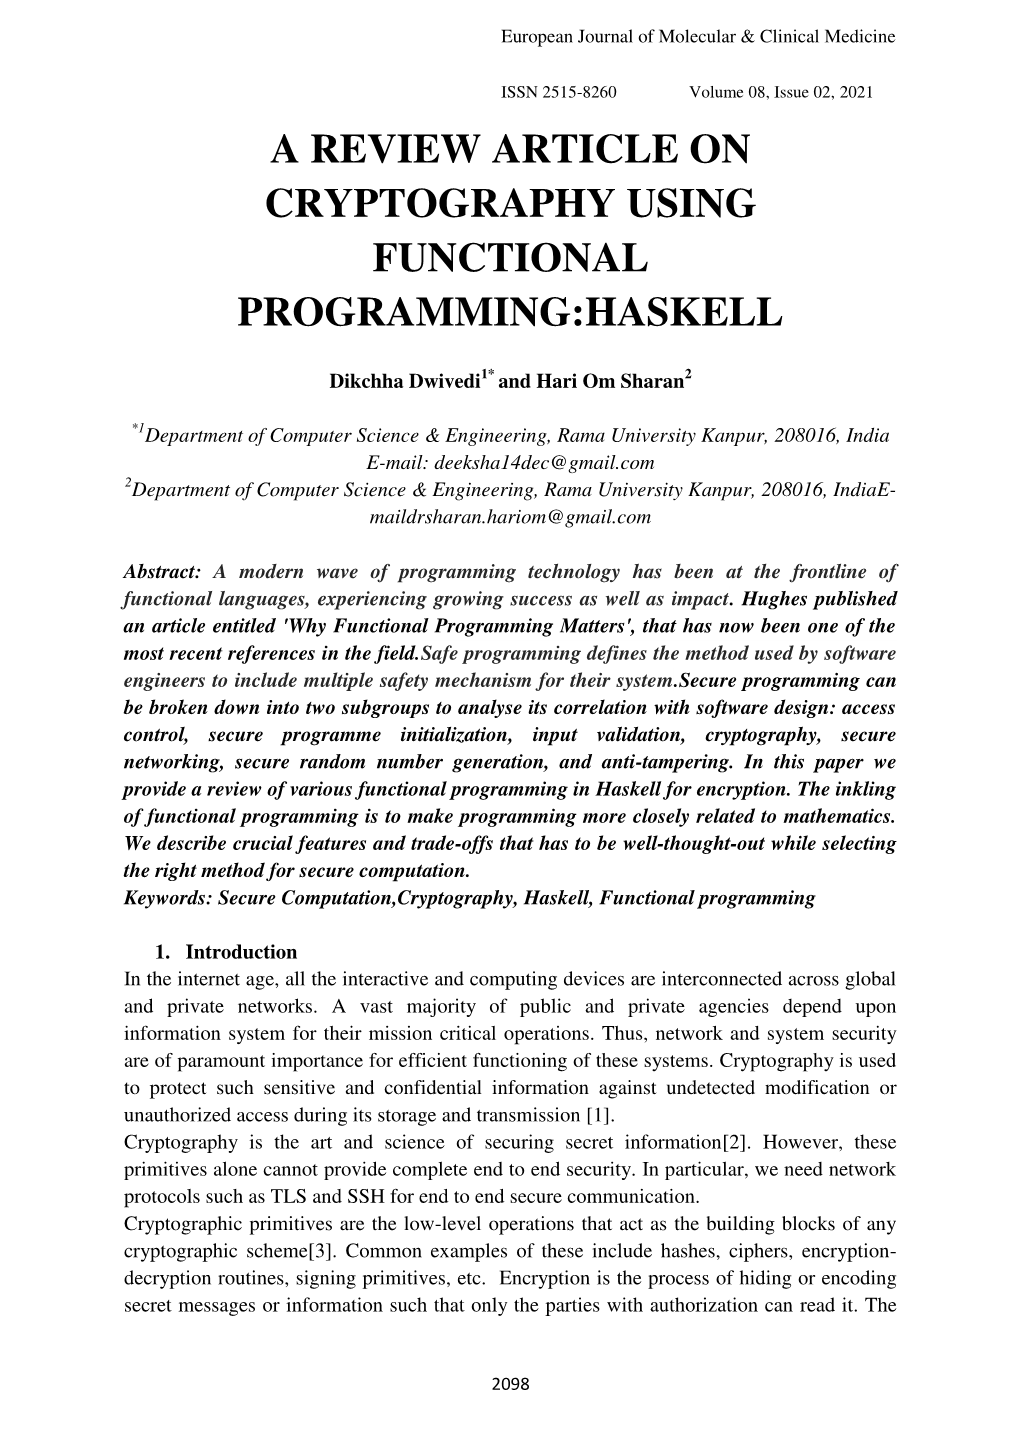 A Review Article on Cryptography Using Functional Programming:Haskell